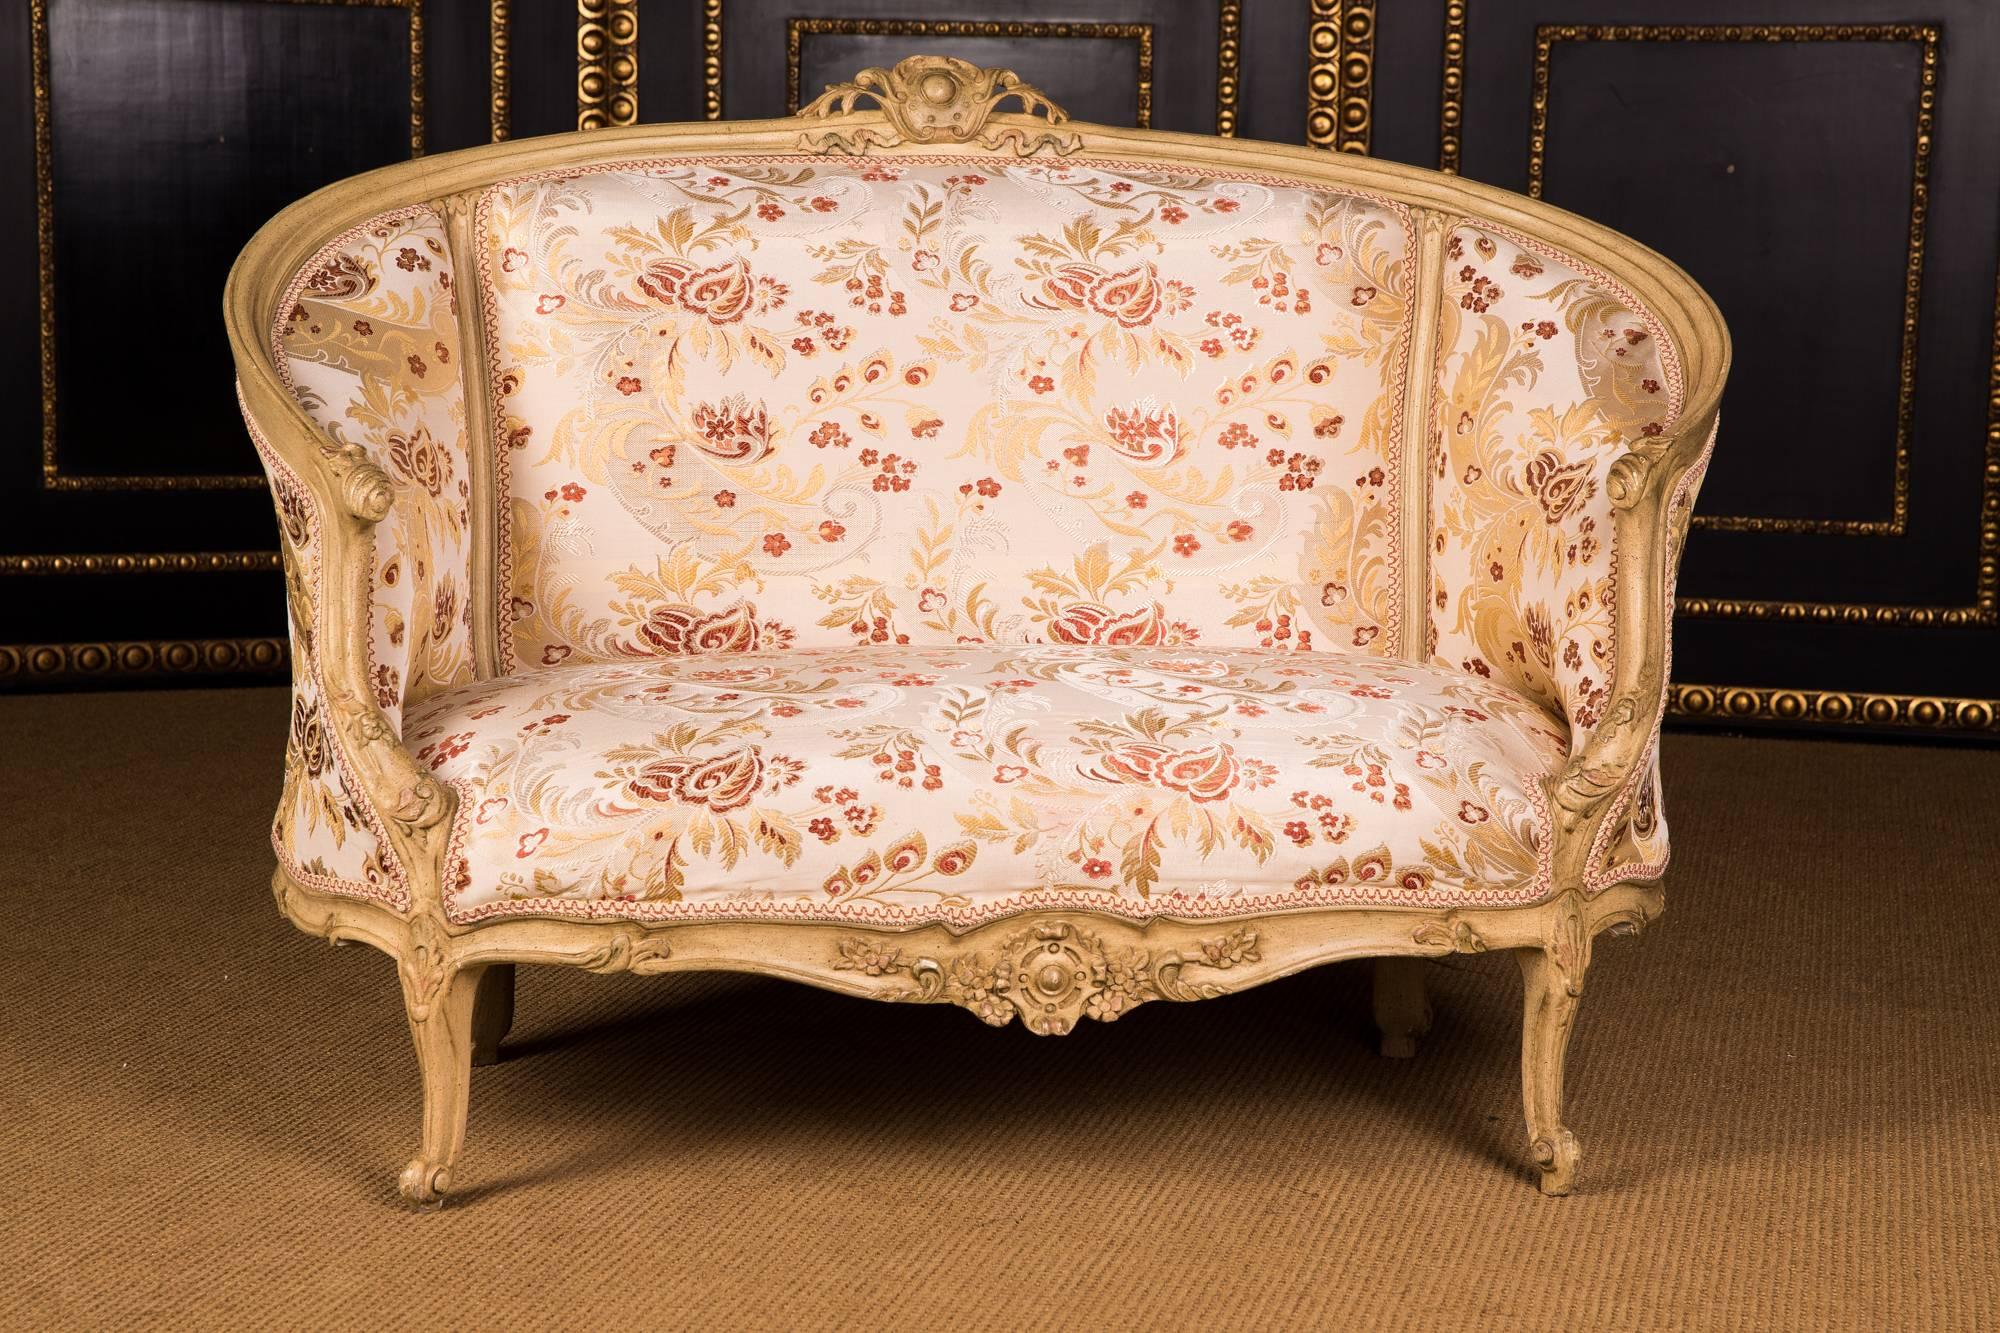 Solid beechwood, carved, colored and gilded. Semicircular ascending backrest frame with perforated rocaille crowning. Passive curved frame with richly reifiert carved leaf. Slightly bent frame on curly legs.
The seat and backrest are finished with